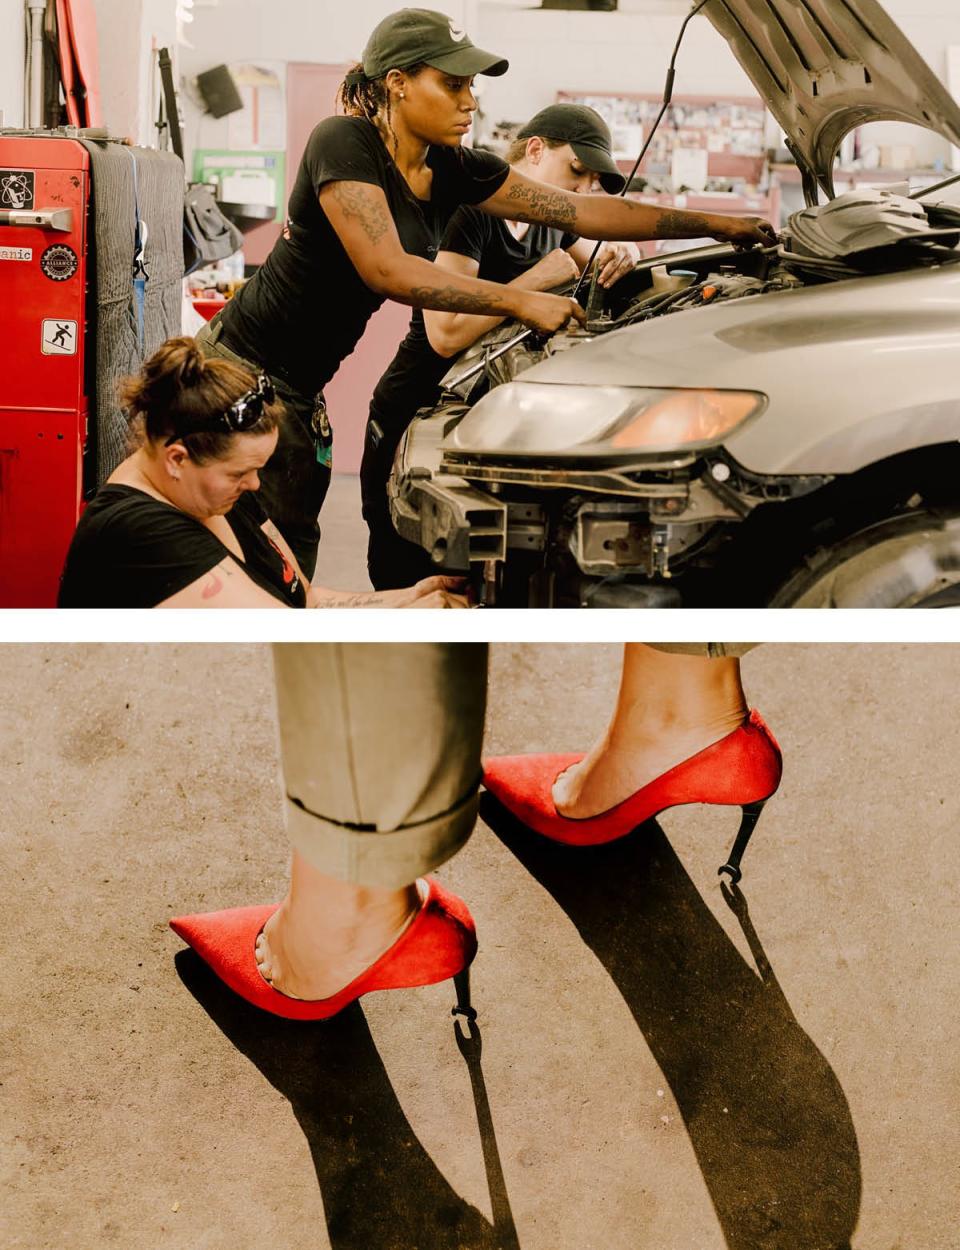 All Hands on Deck Above, from right: Sweeney and technicians Chidique Alburg and Heather Dagel tune up a client’s car. Girls Auto Clinic offers everything from emissions inspections and tire rotations to free monthly Car Care Workshops. Brave New Heights Right: “I used to be ashamed of my heels because they have grease on them from the work I do,” Banks says of her custom Barollo wrench pumps. “Now I love coming in with my heels all beat up. They’re like my scars that I’m proud of.”